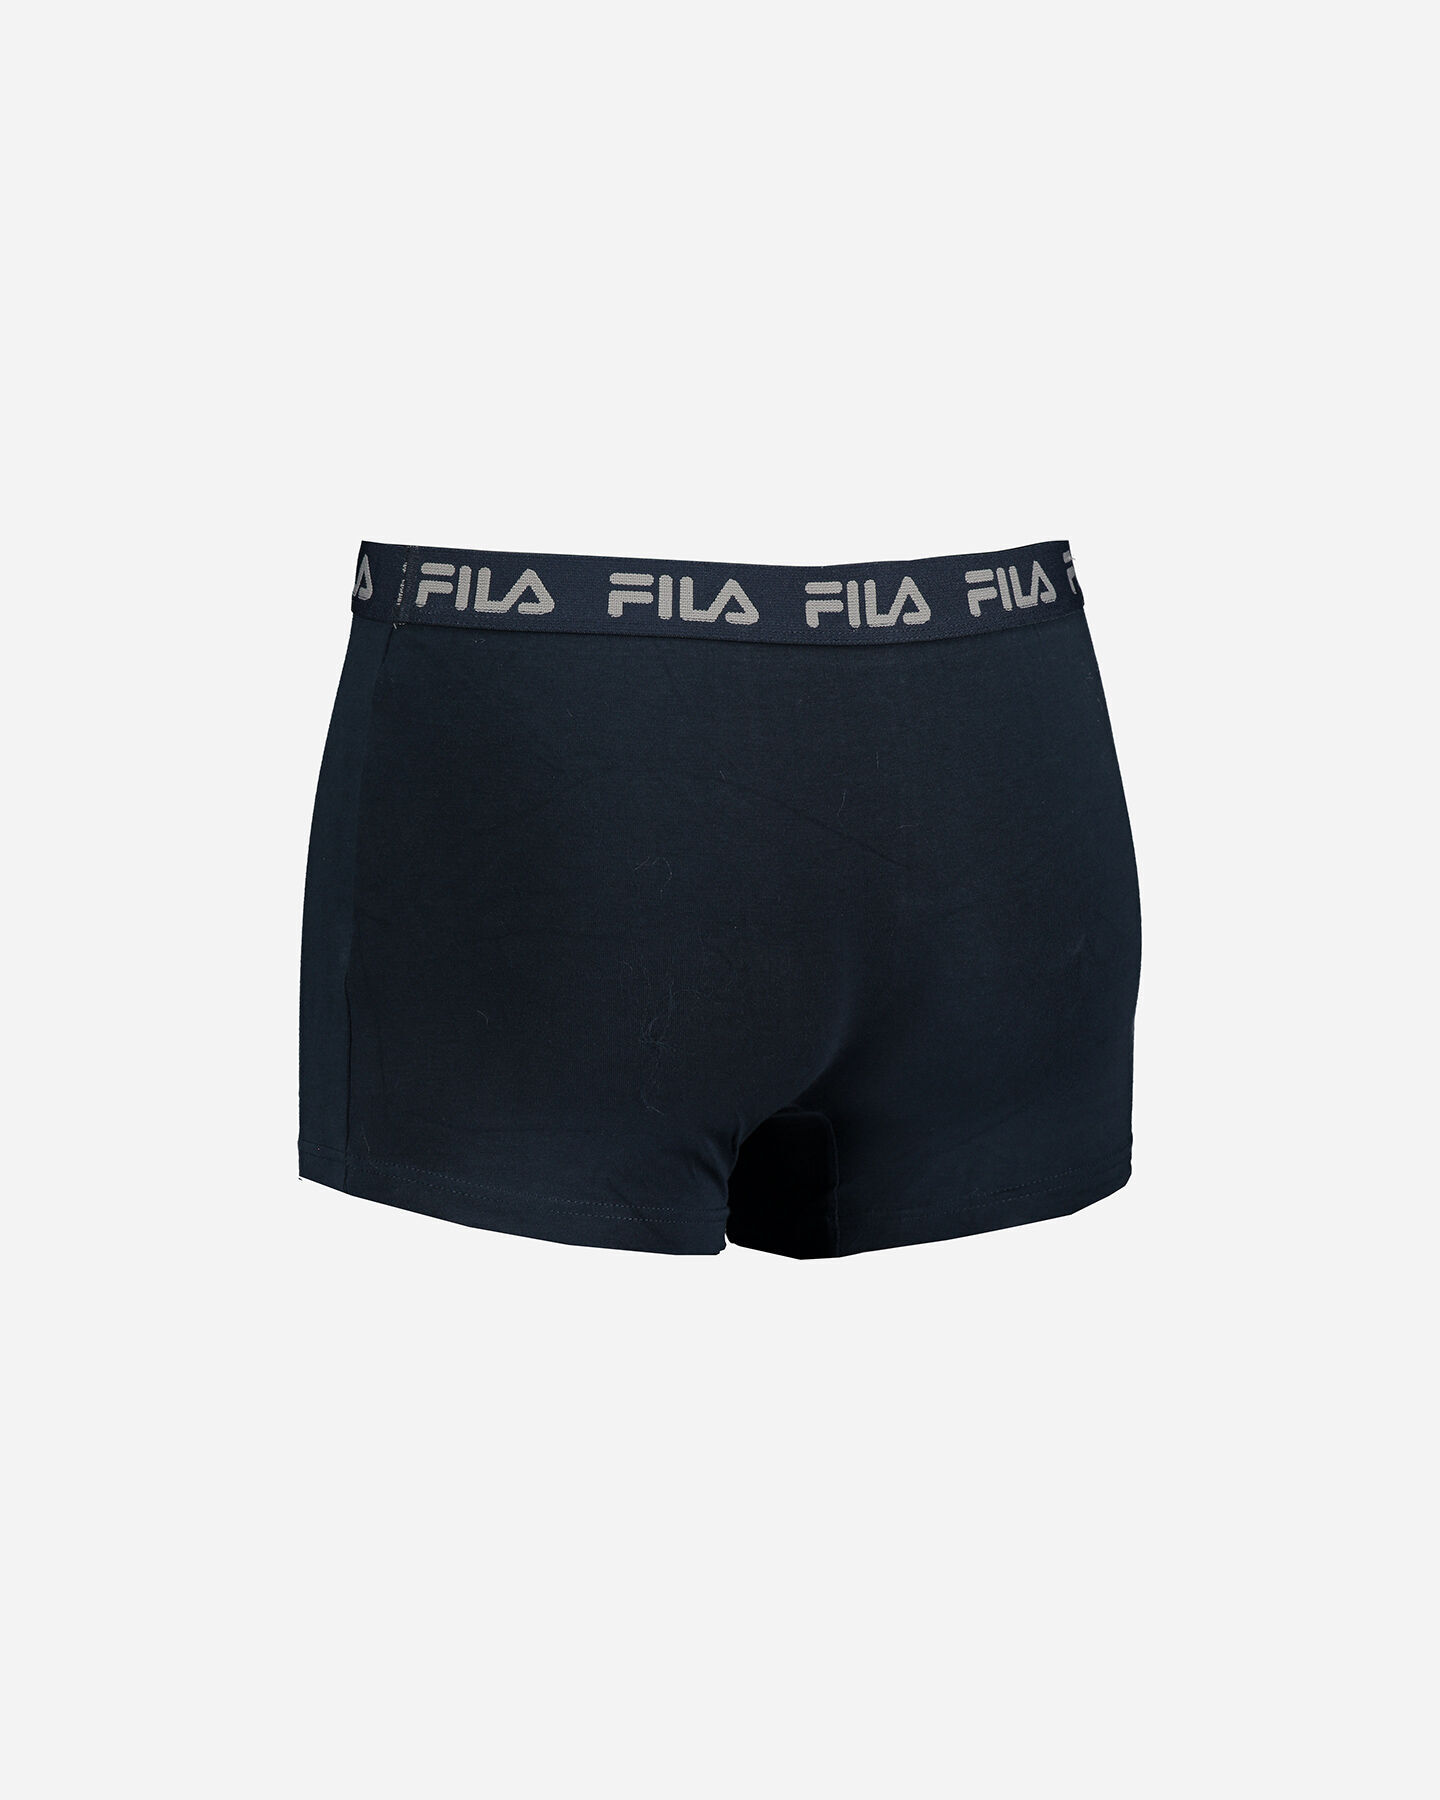  Intimo FILA 2PACK BOXER PLACED LOGO M S4089017|321|S scatto 2